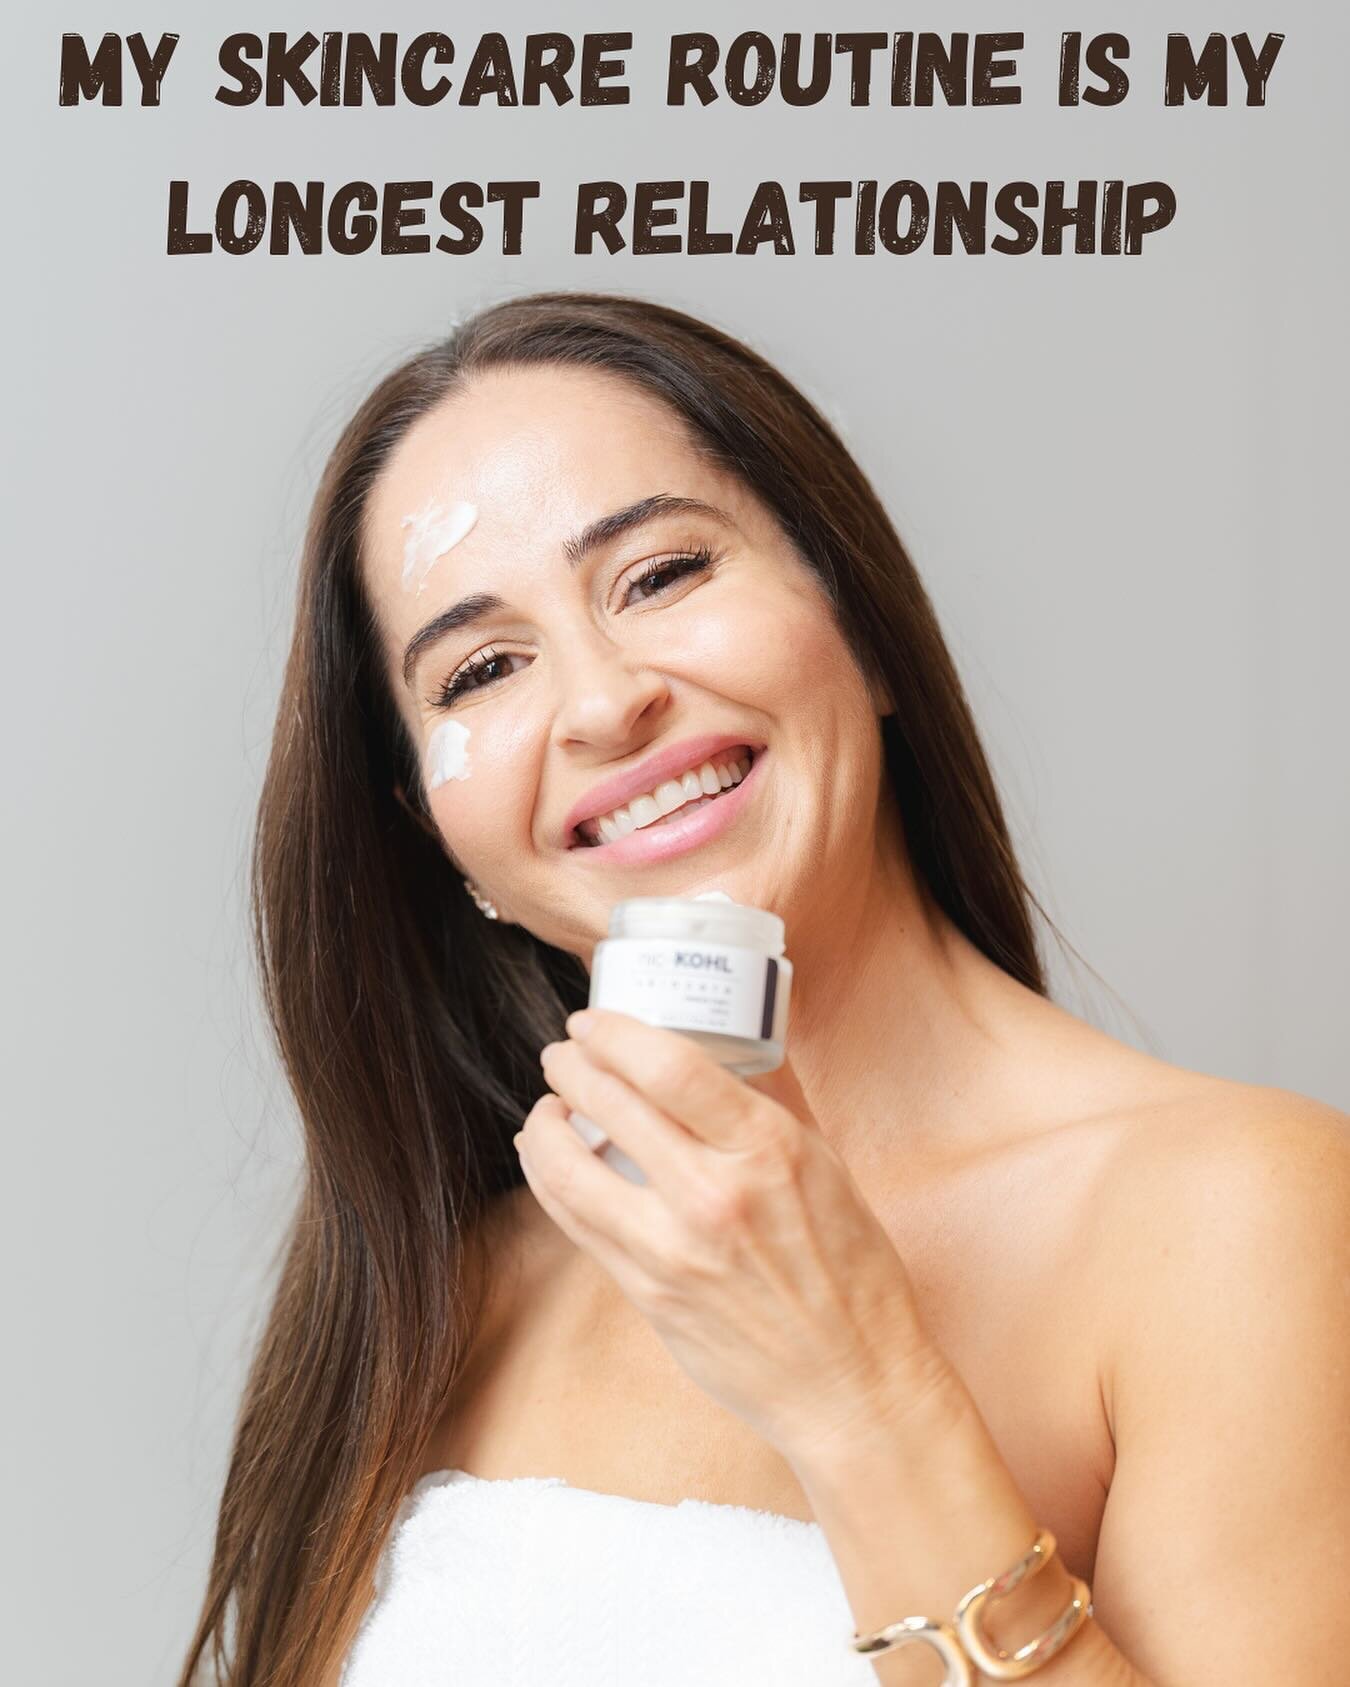 Here for the long-haul, we&rsquo;re in for a super Duper long-term relationship &hearts;️🧴 from severe acne, sensitivity, pigmentation, and now ageing&hellip;..I love this relationship. 
.
.
.
#Esthetician #OakvilleSkincare #aesthetics  #TheOakville